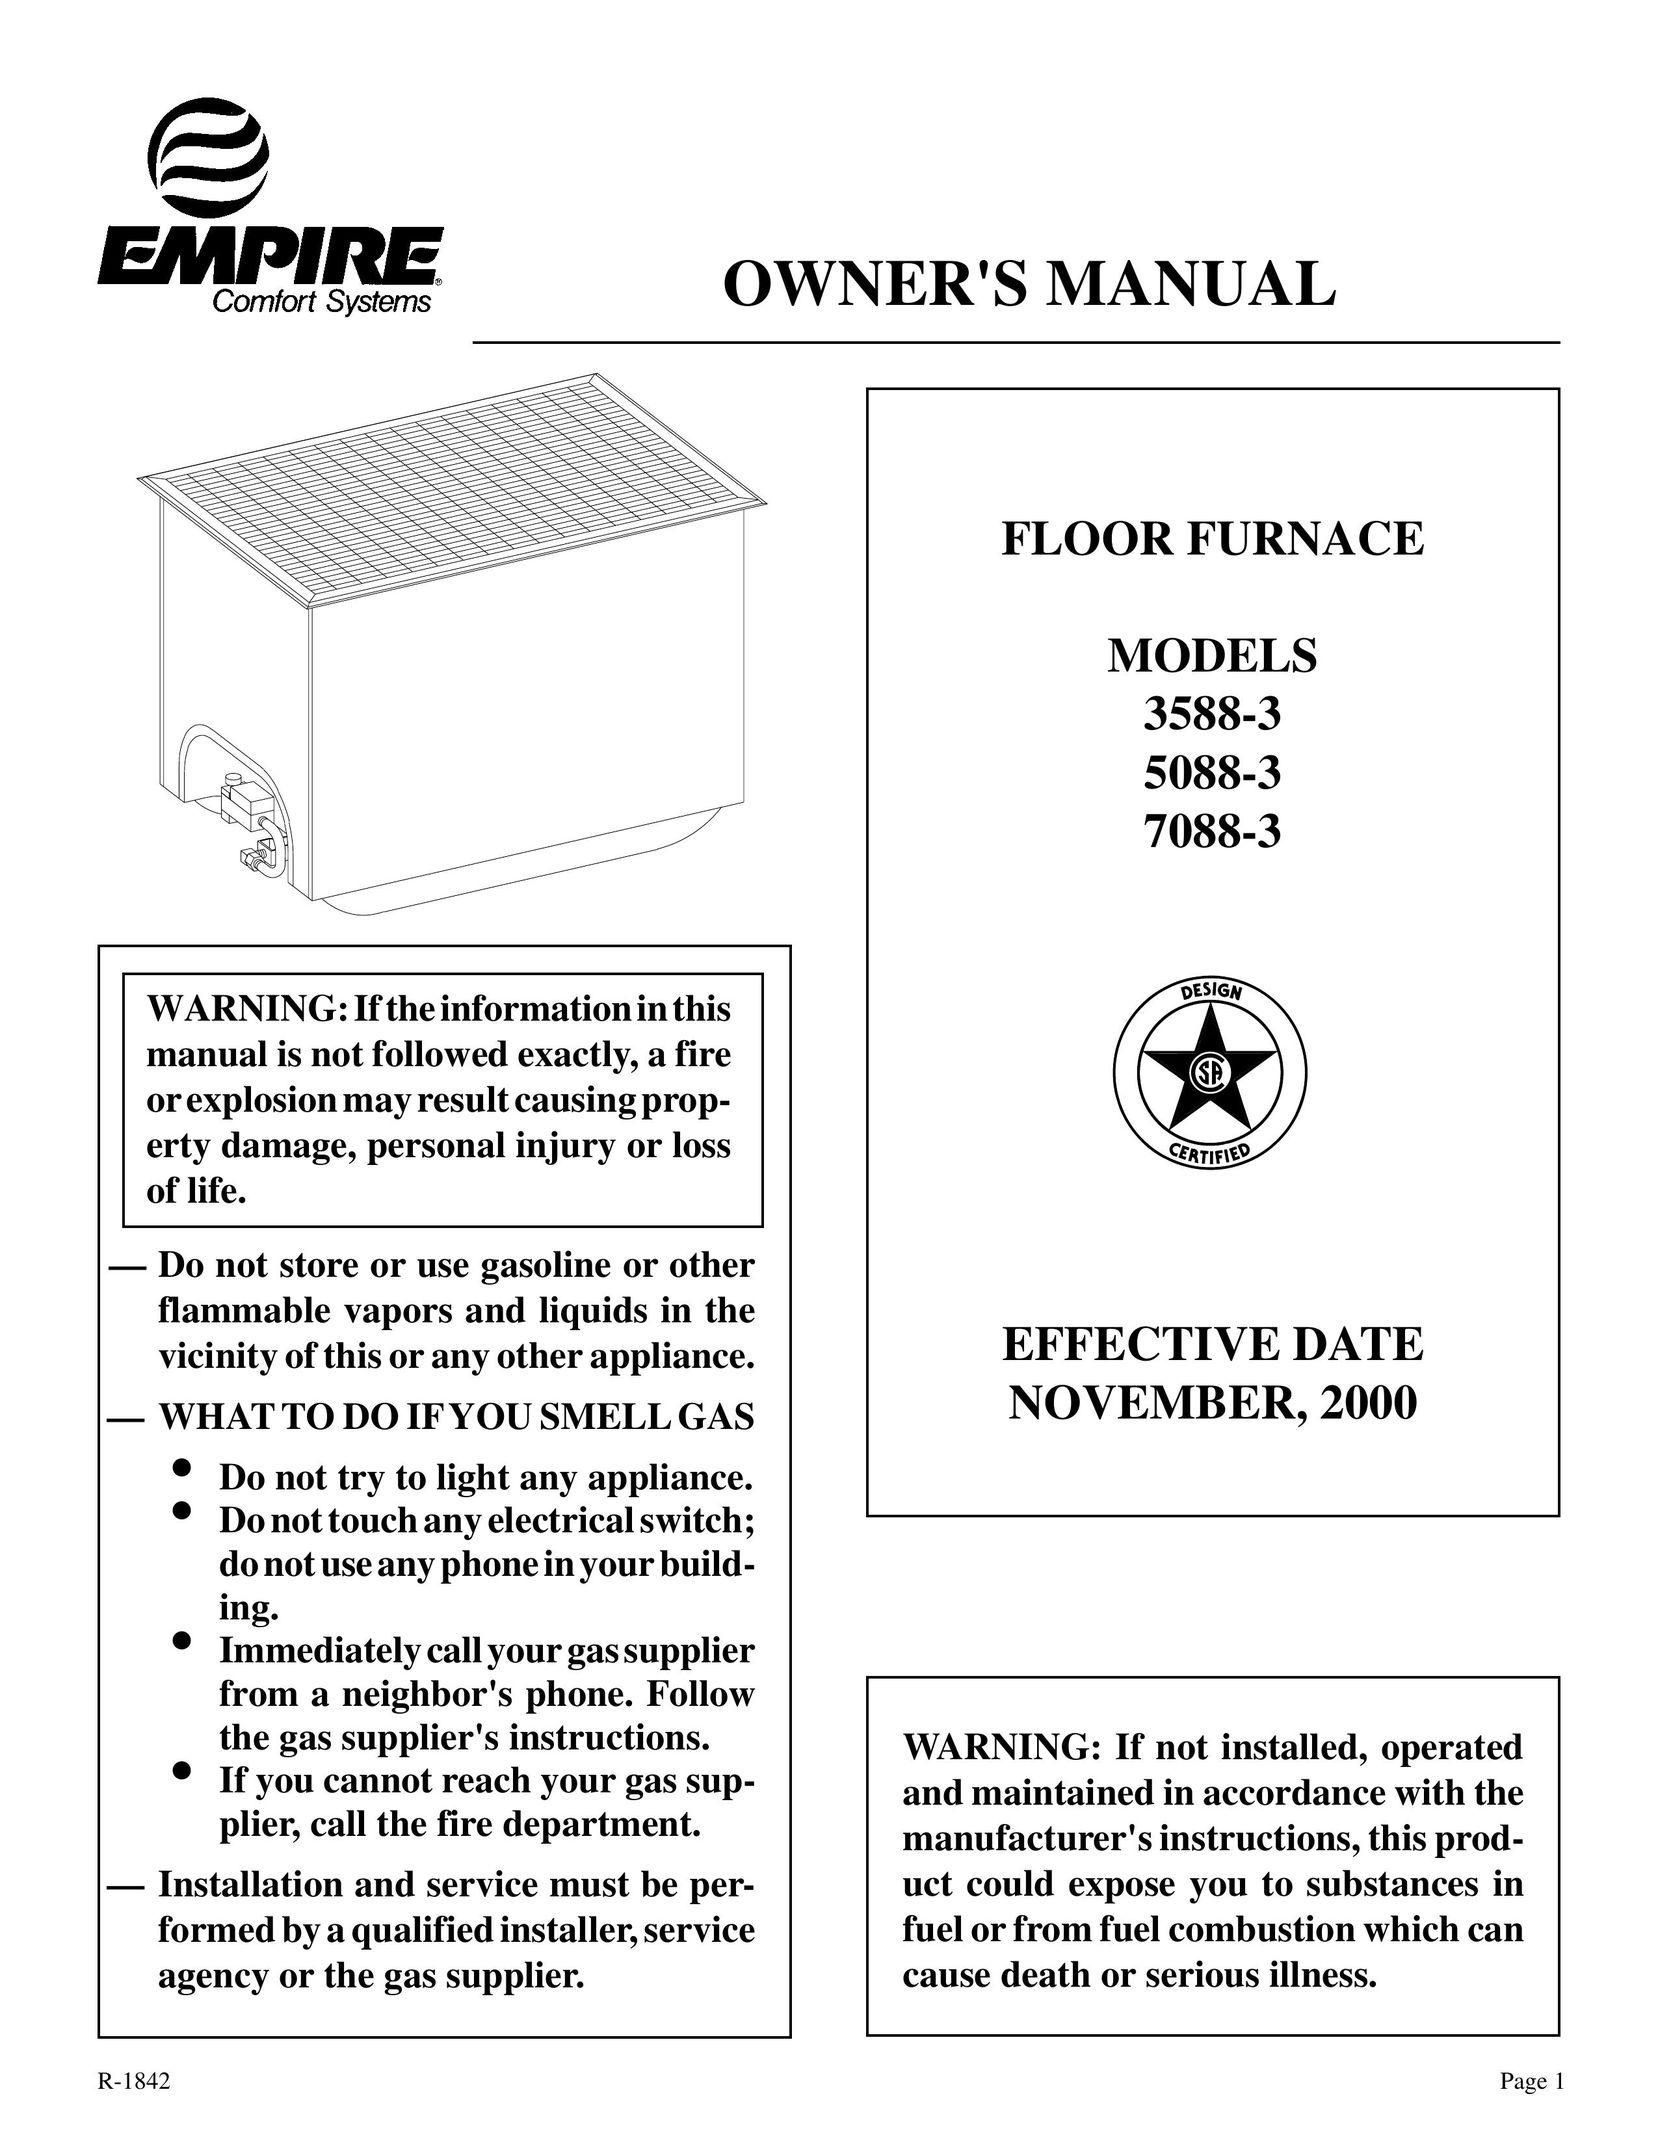 Empire Comfort Systems 3588-3 Furnace User Manual